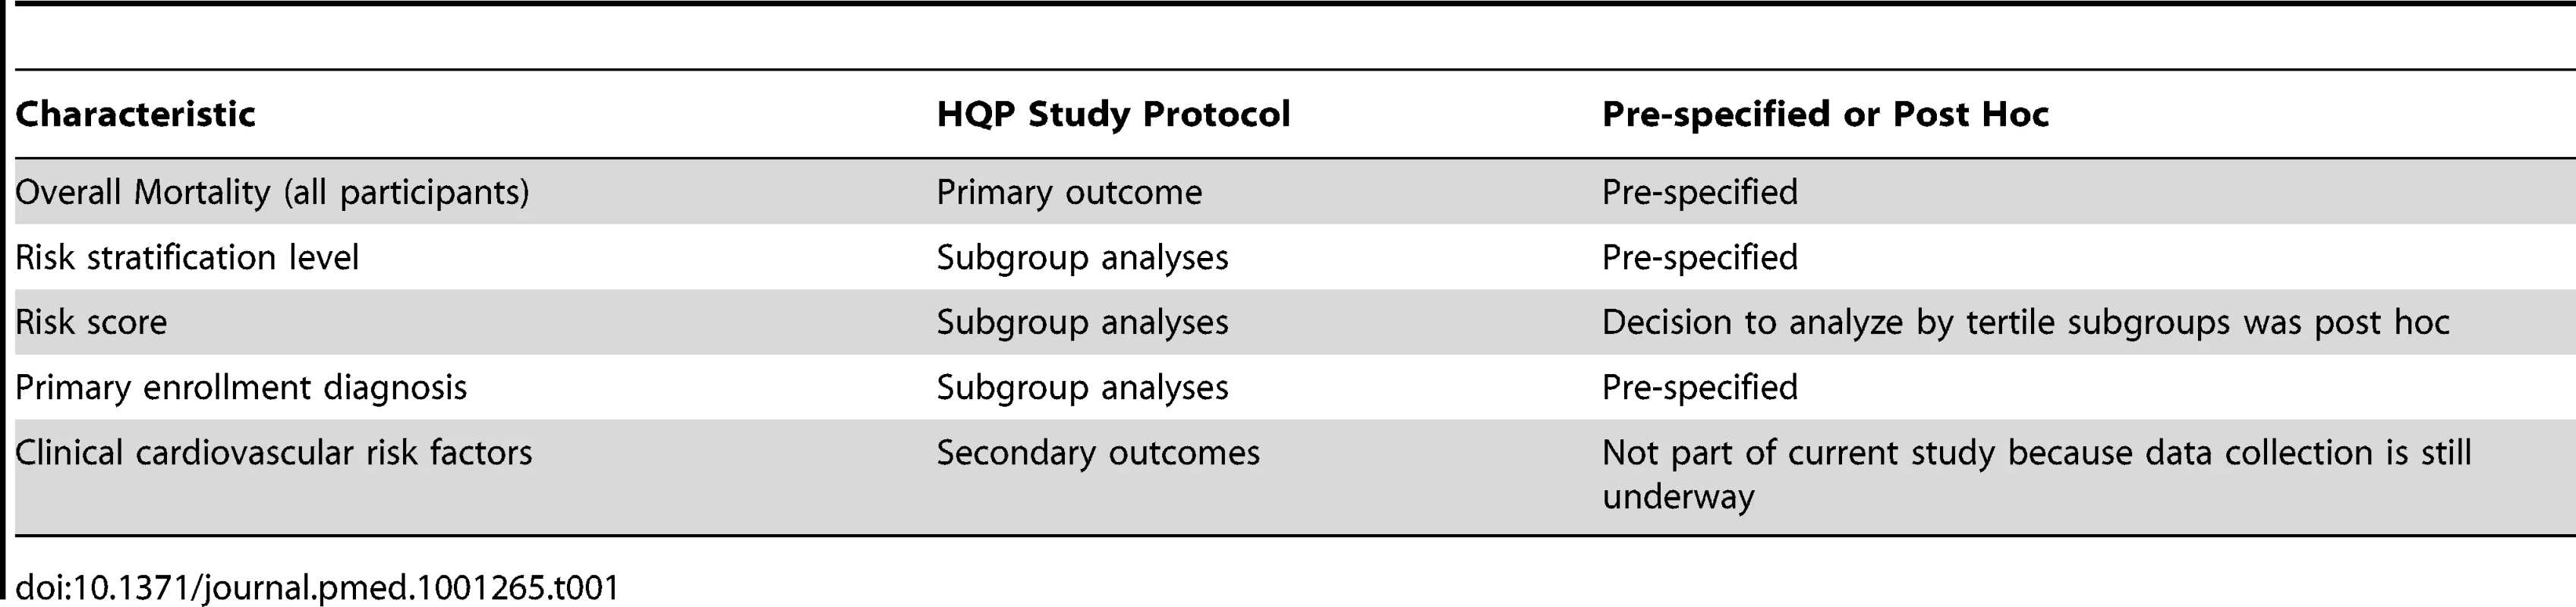 Outcomes and subgroup analyses specified in the study protocol.